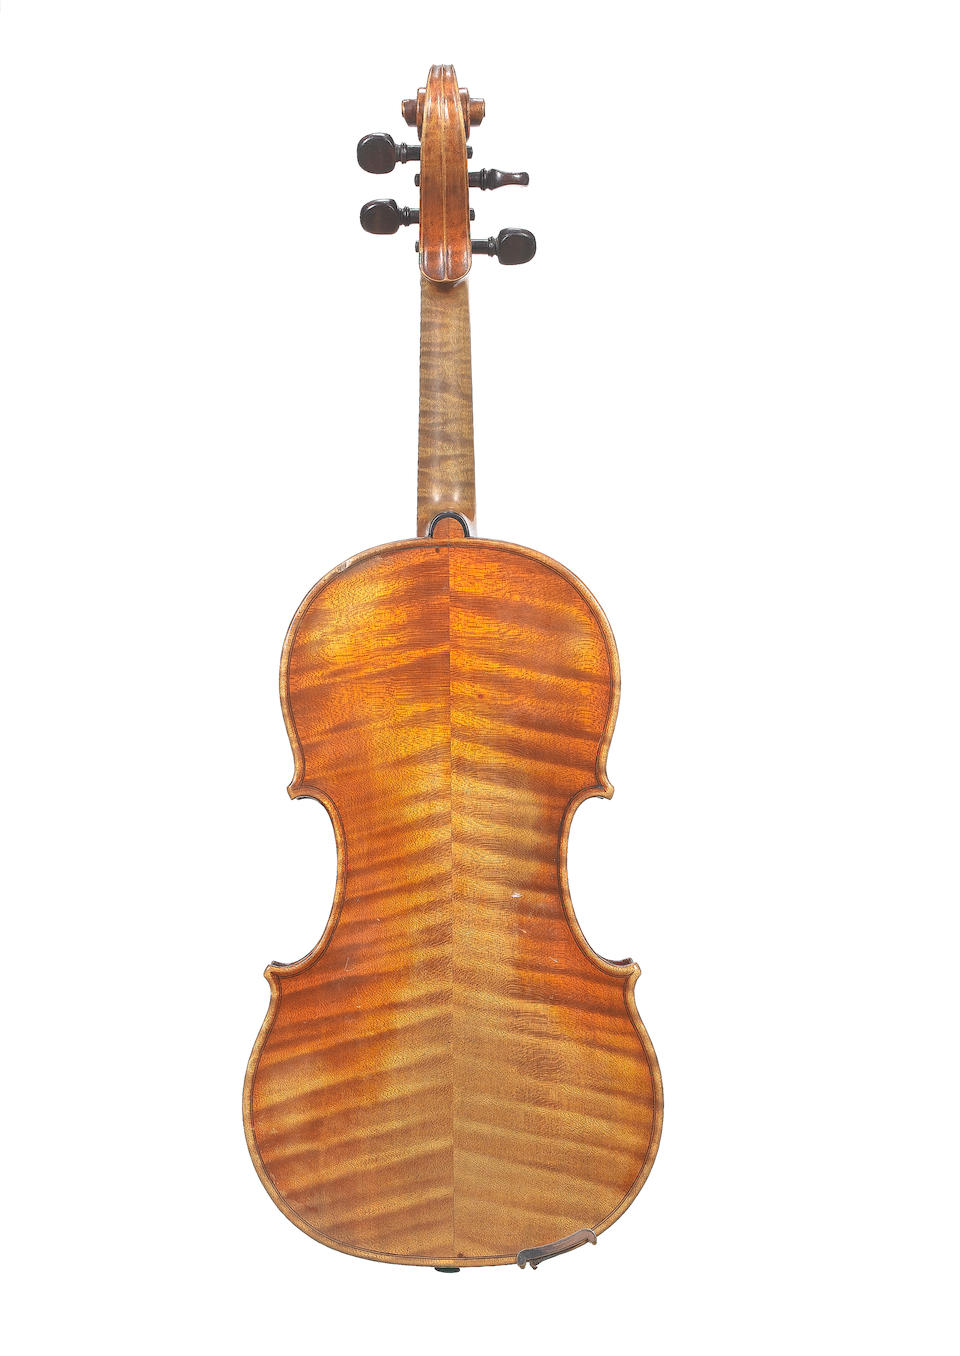 A French Violin by Paul Bailly, 1887